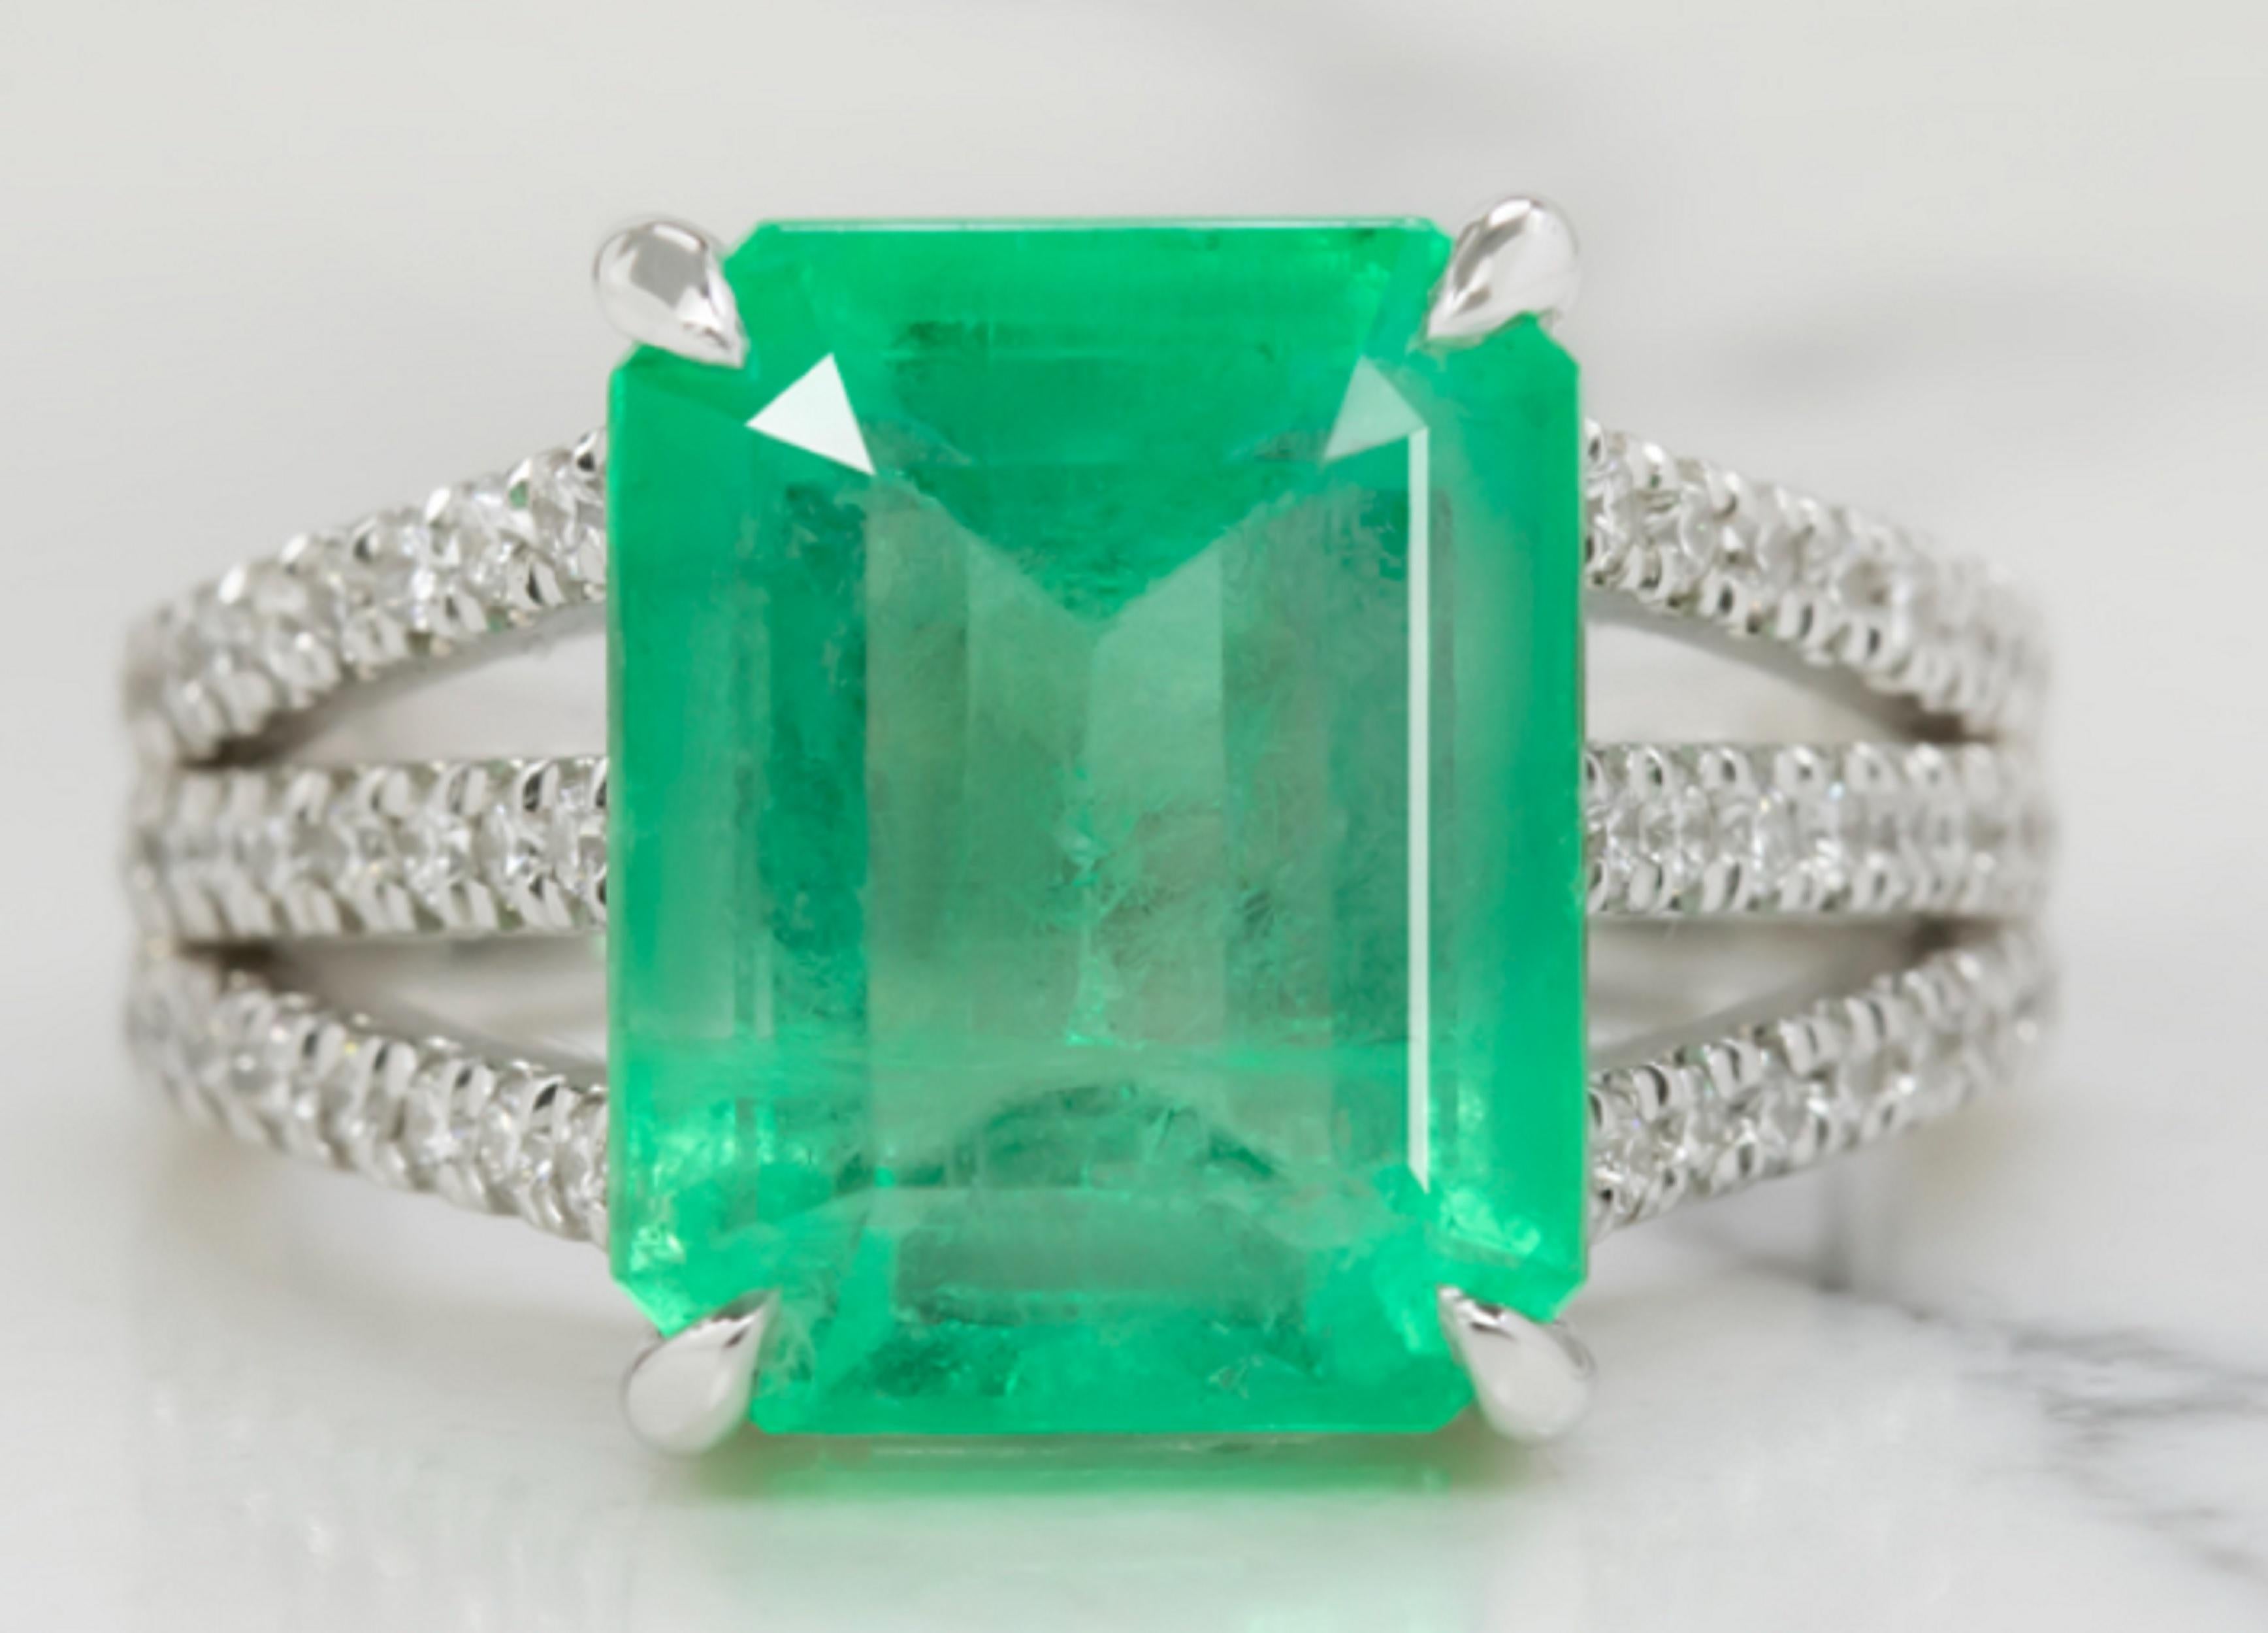 The 6.80 carat emerald is a beautifully vibrant and highly saturated spring green hue, and its sophisticated emerald cut displays lovely sparkle. The claw prong setting offers a chic modern touch while the diamond encrusted triple split shank adds